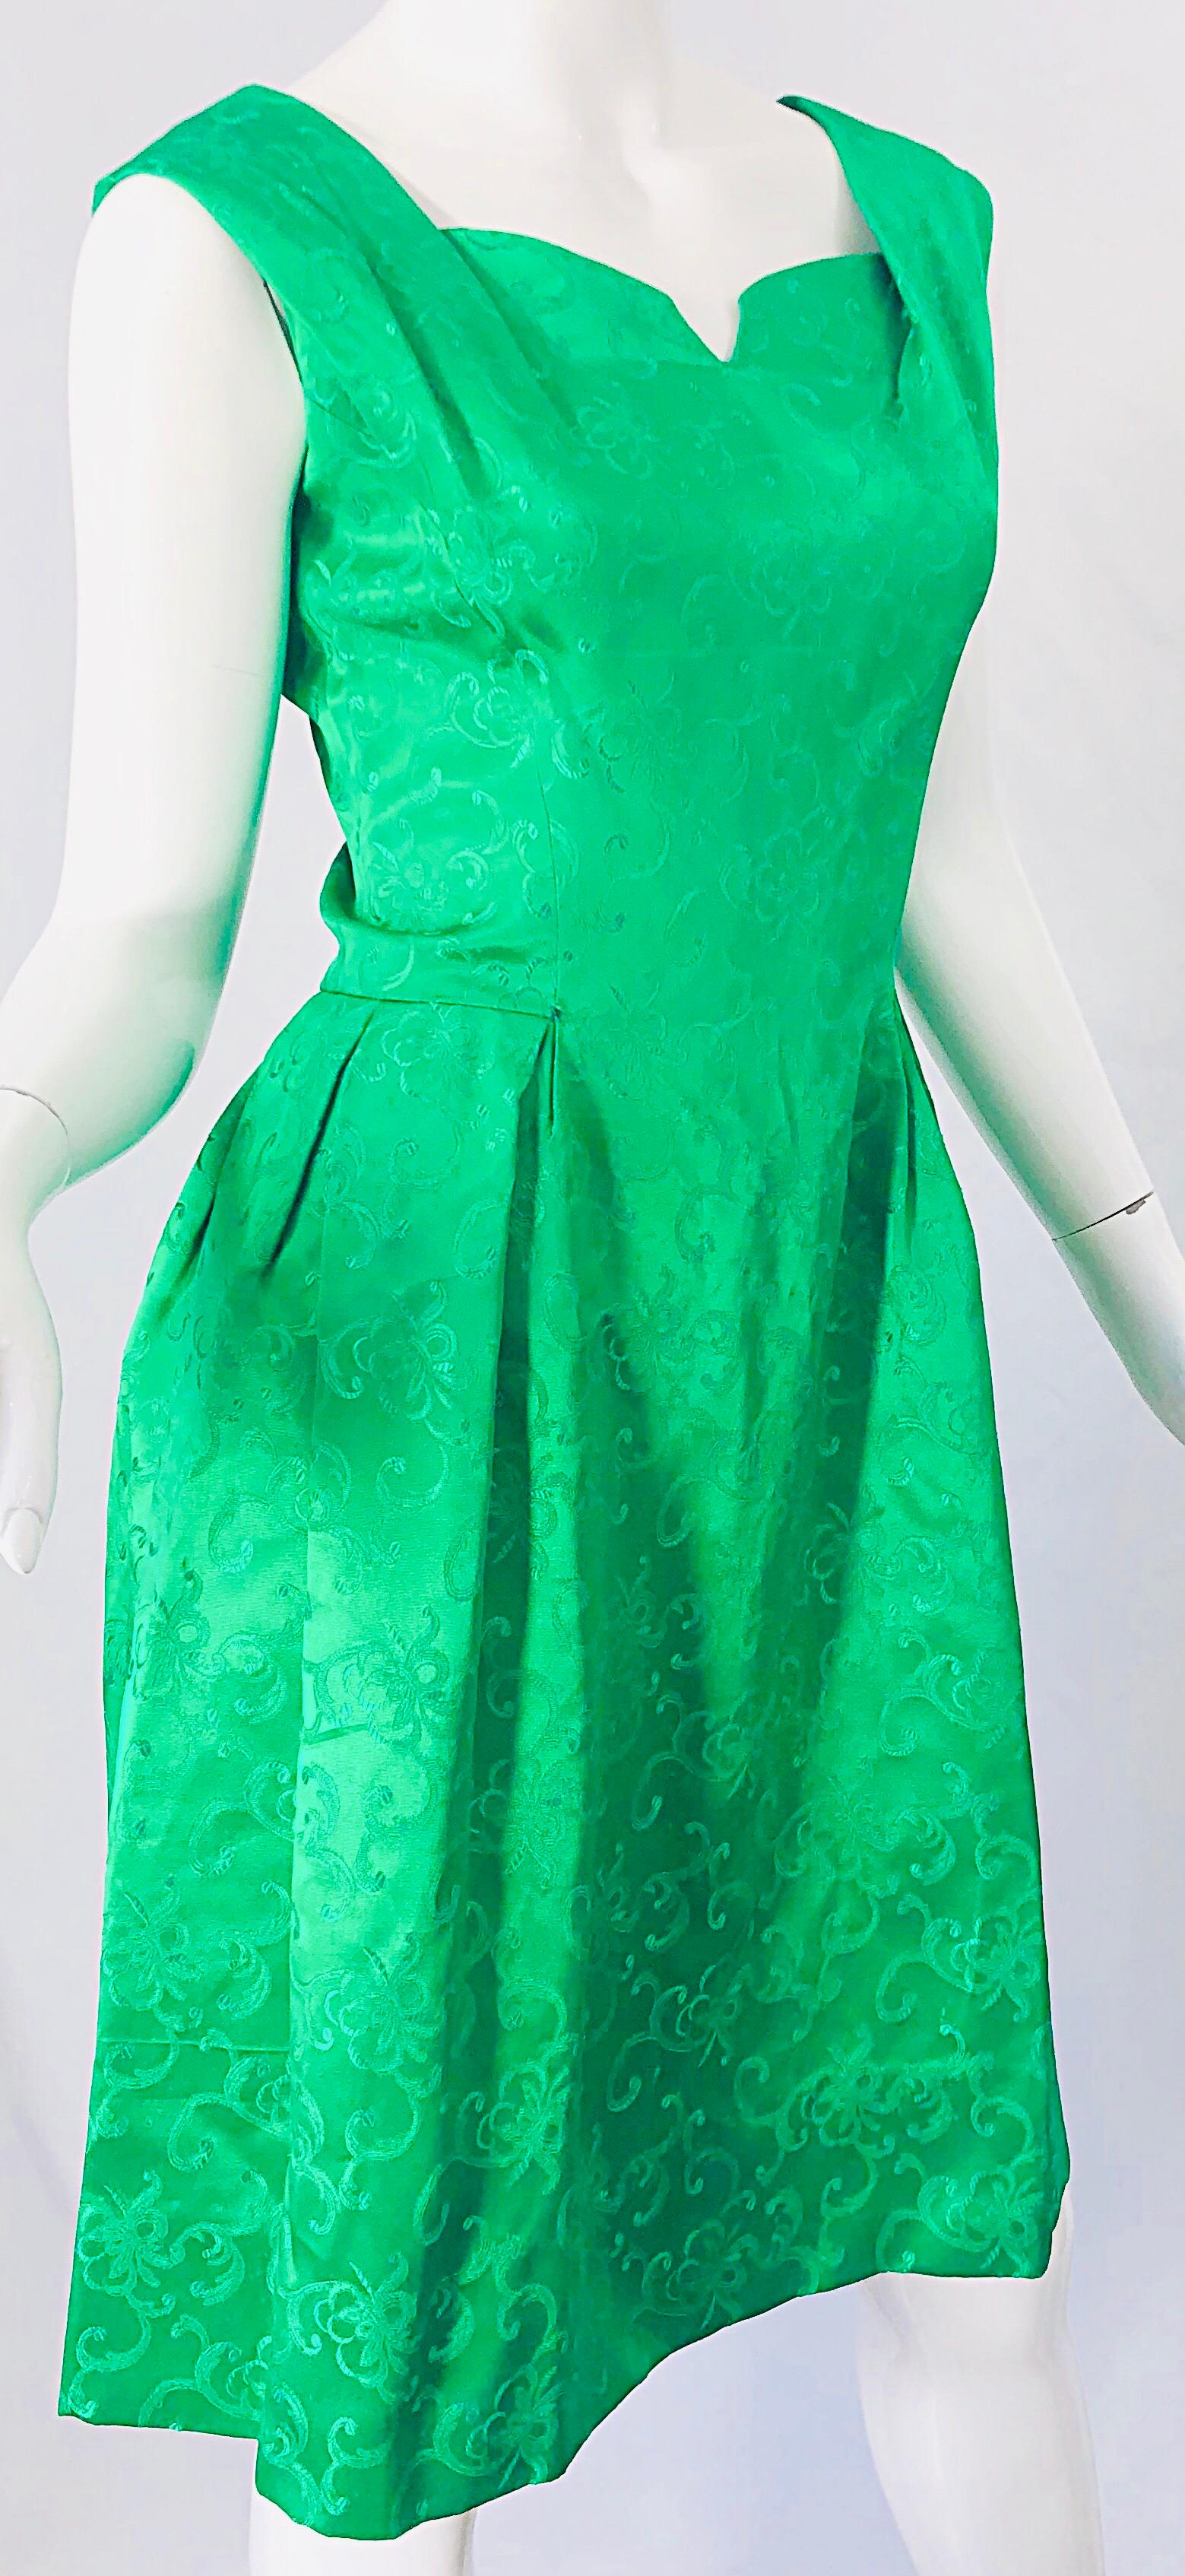 Chic 1960s Kelly Green Silk Damask Sleeveless Vintage 60s A-Line Dress For Sale 4